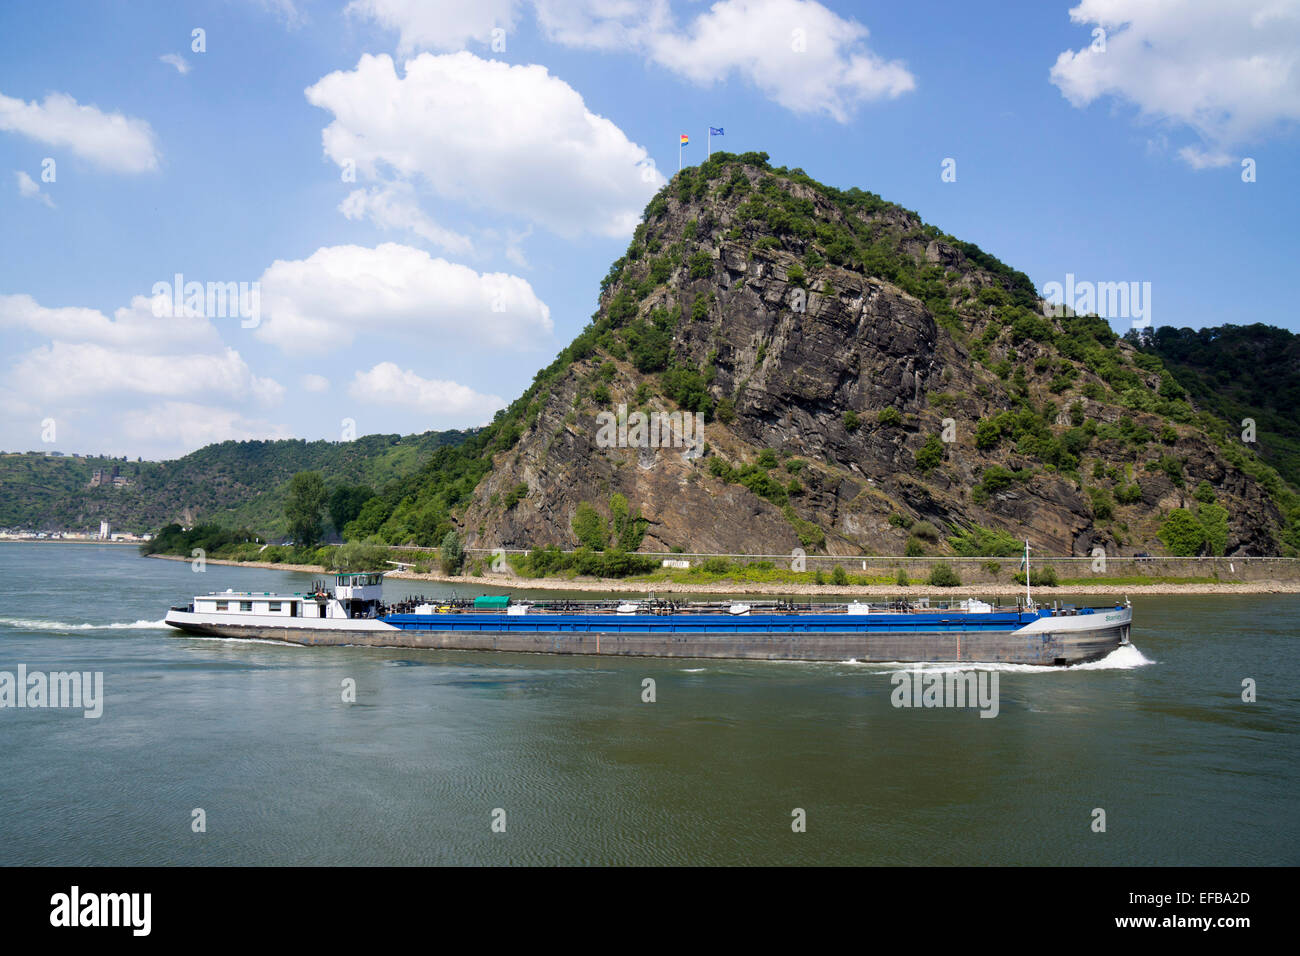 Cargo ship on the Rhine at the Lorelei rock, shale rock in the UNESCO World Heritage Upper Middle Rhine Valley near St. Goar, St. Goar, Germany, Europe - 2014 Stock Photo